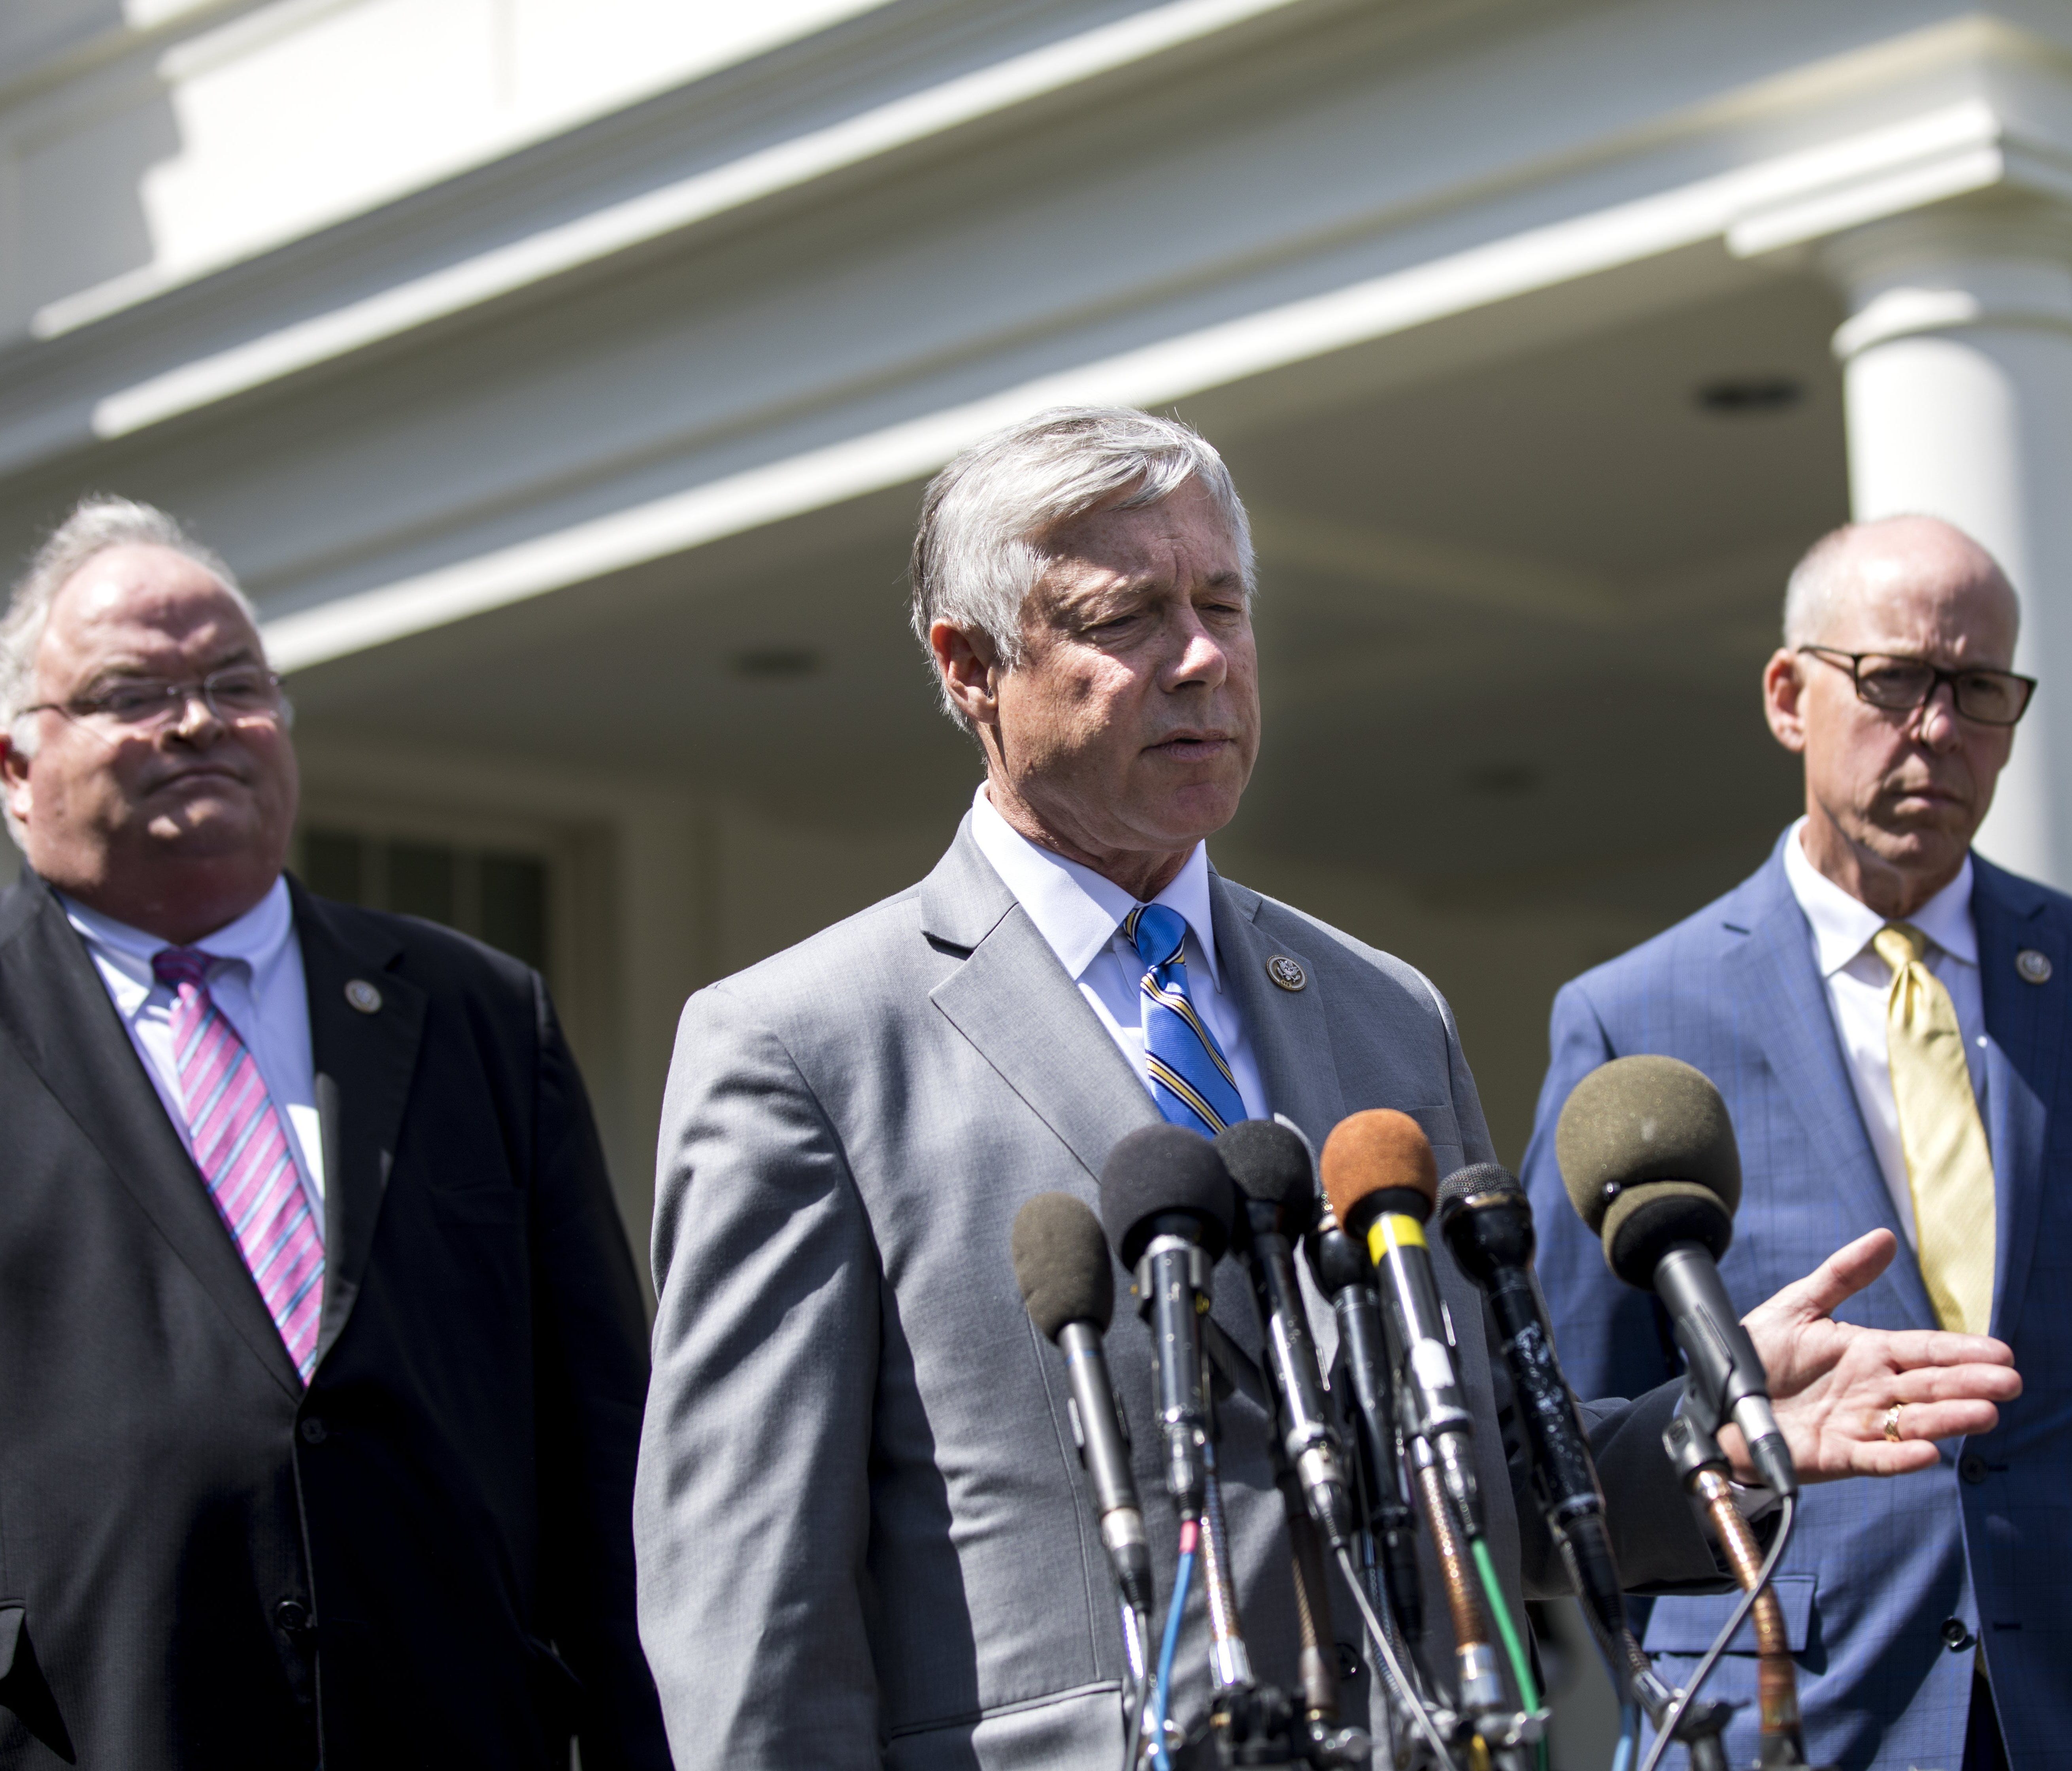 Rep. Fred Upton, joined by Reps. Billy Long and Greg Walden, speaks to the media about health care negotiations after meeting with President Trump at the White House on May 3, 2017.